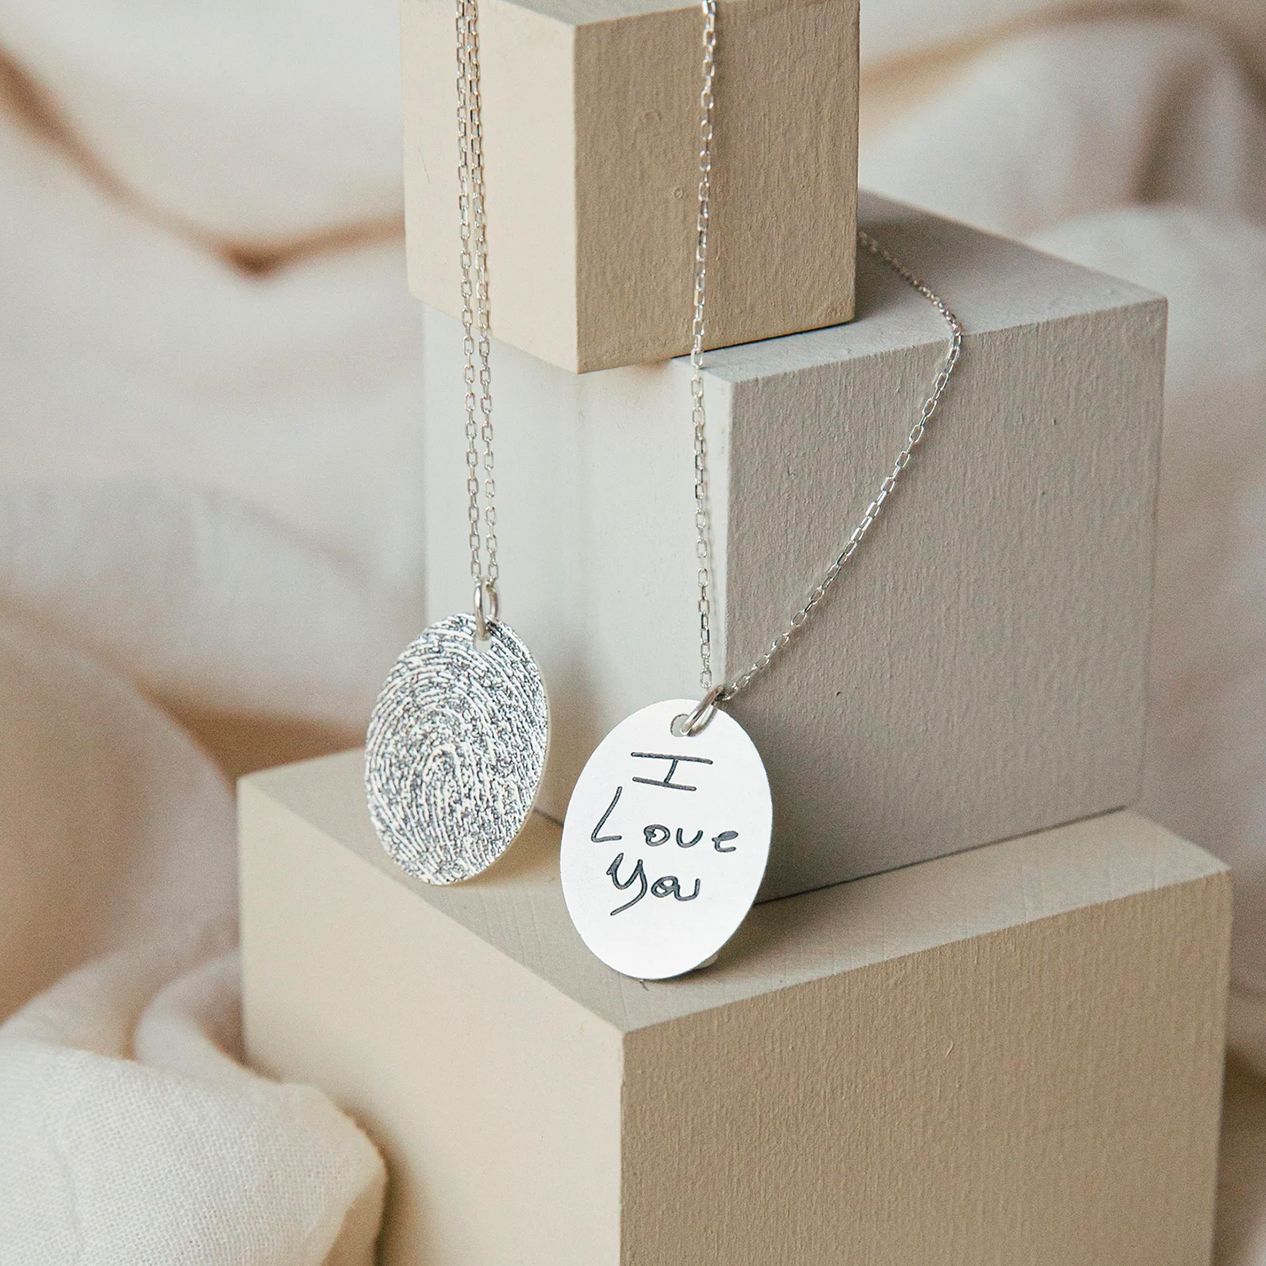 21 Best Mother's Day Gifts for Grandma That Are So Thoughtful